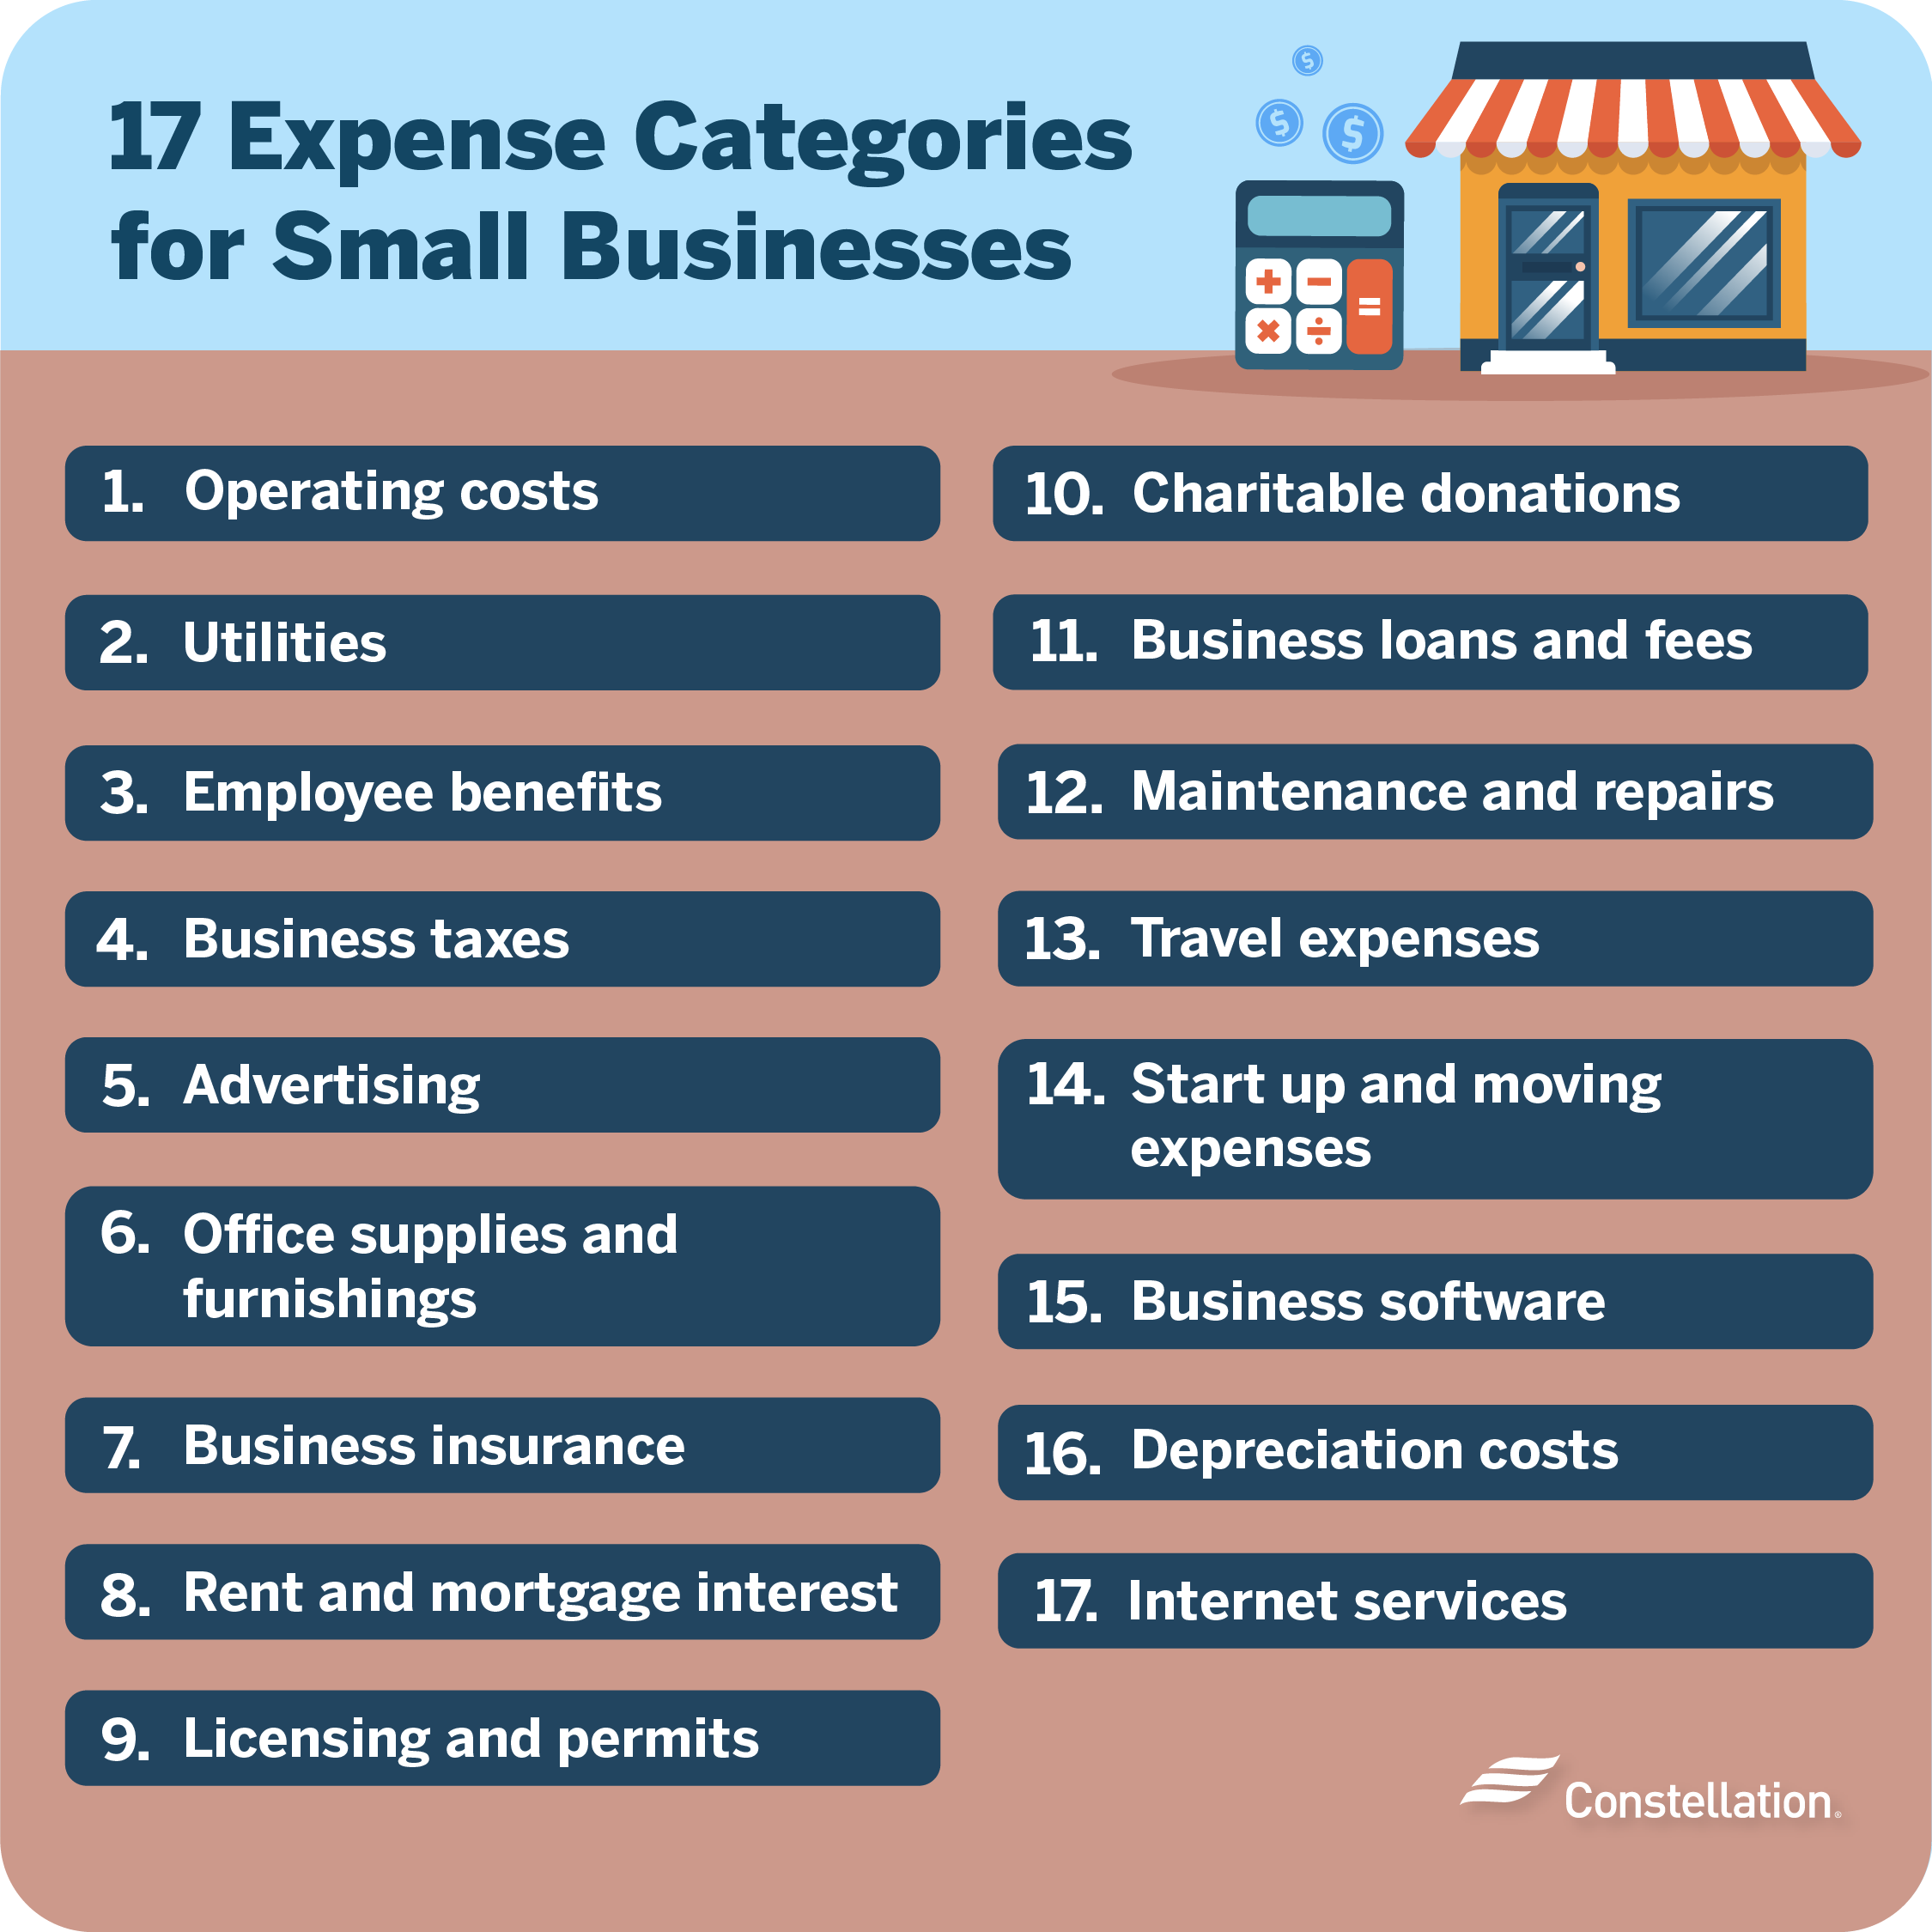 Categories of business expenses.